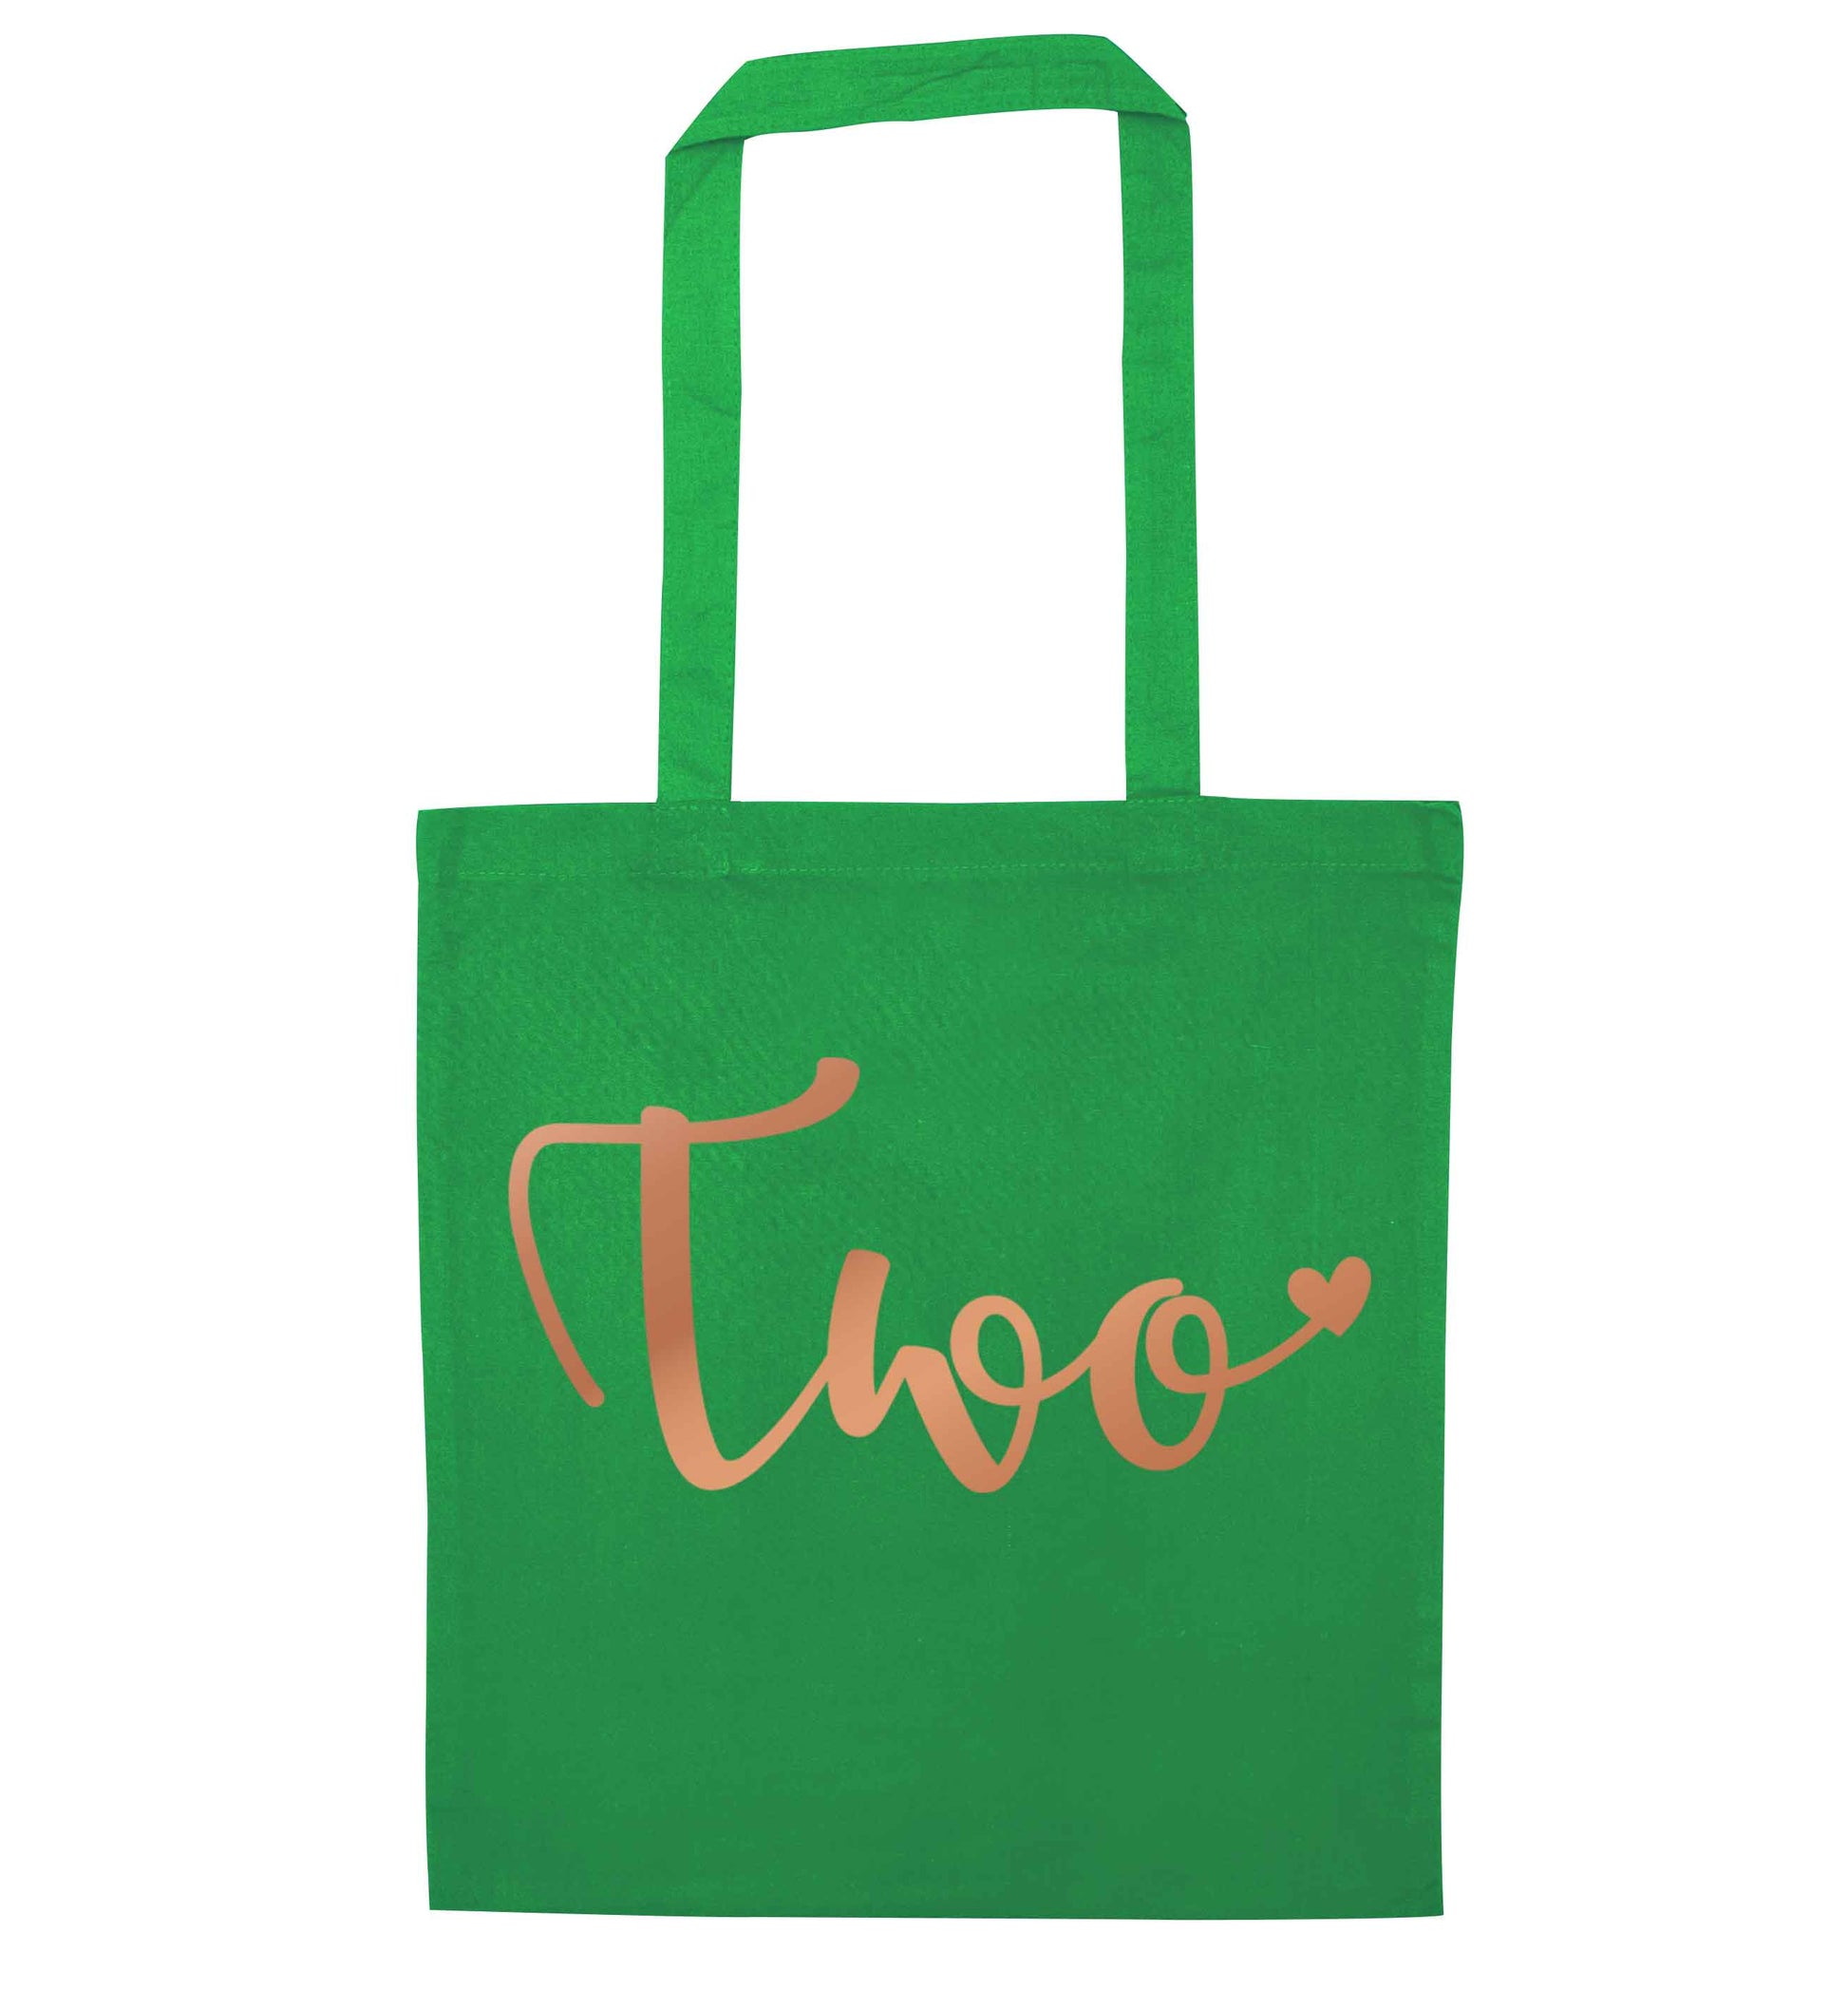 Two rose gold green tote bag